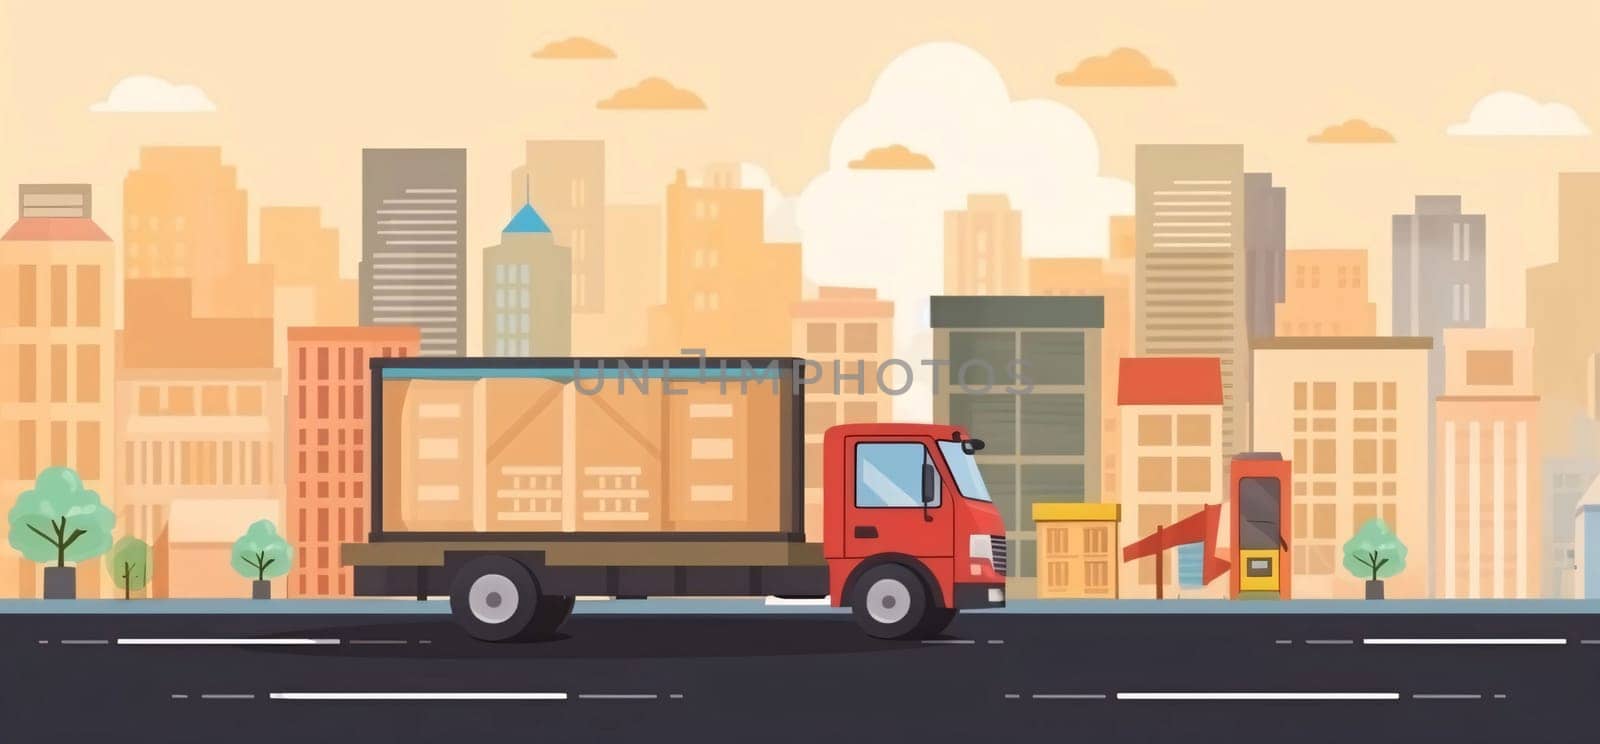 Banner: Truck on the road with cityscape background. Vector illustration.